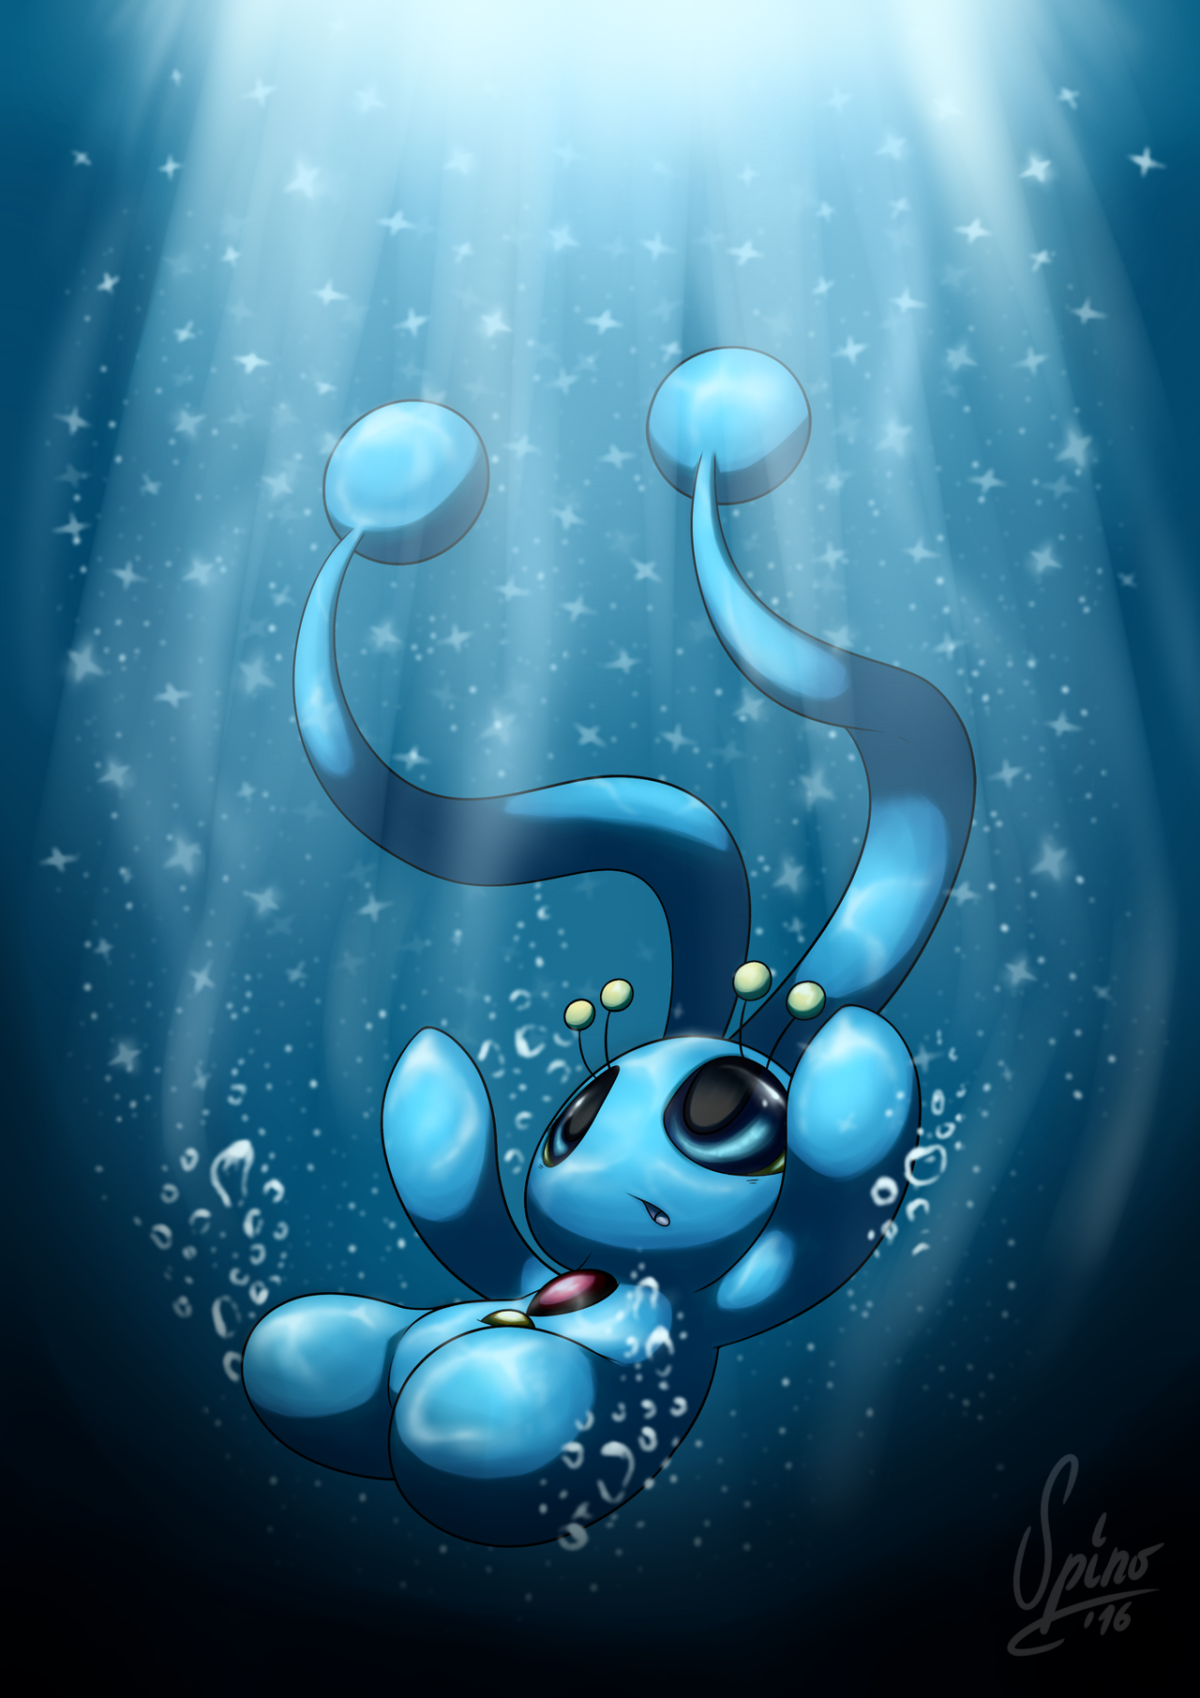 20 Years of Pokemon – Manaphy by SpinoOne on DeviantArt